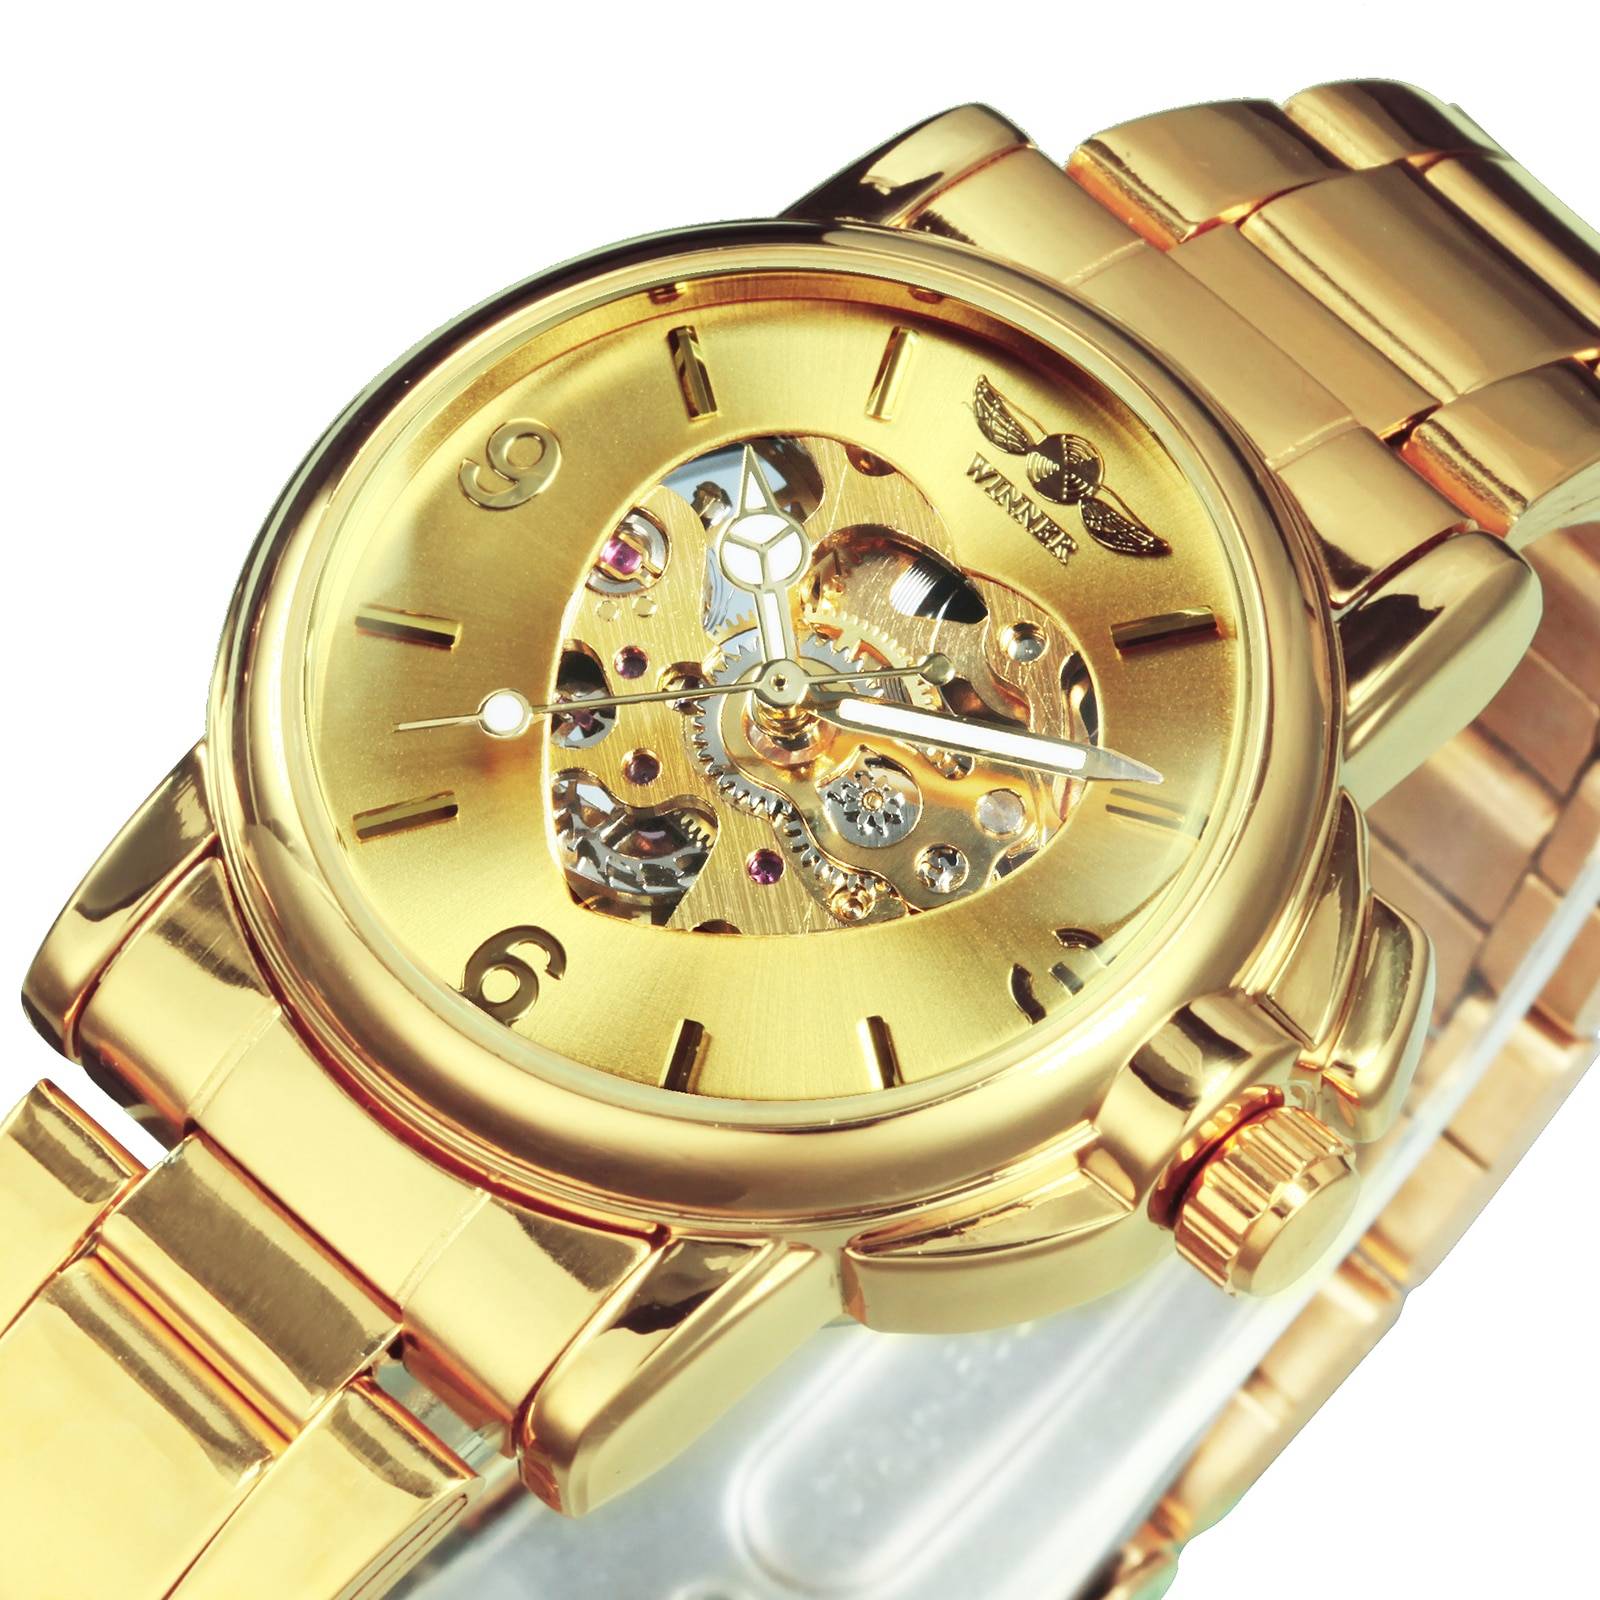 WINNER Watches Women Fashion Watch 2020 Automatic Mechanical Golden Heart Skeleton Dial Stainless Steel Band Elegant Lady Watch Watches color: BO GOLDEN|BO GOLDEN BLACK|BO GOLDEN PINK|BO GOLDEN WHITE|BO SILVER BLACK|BO SILVER WHITE|Golden|GOLDEN BLACK|GOLDEN PINK|GOLDEN WHITE|Silver + White|Silver Black